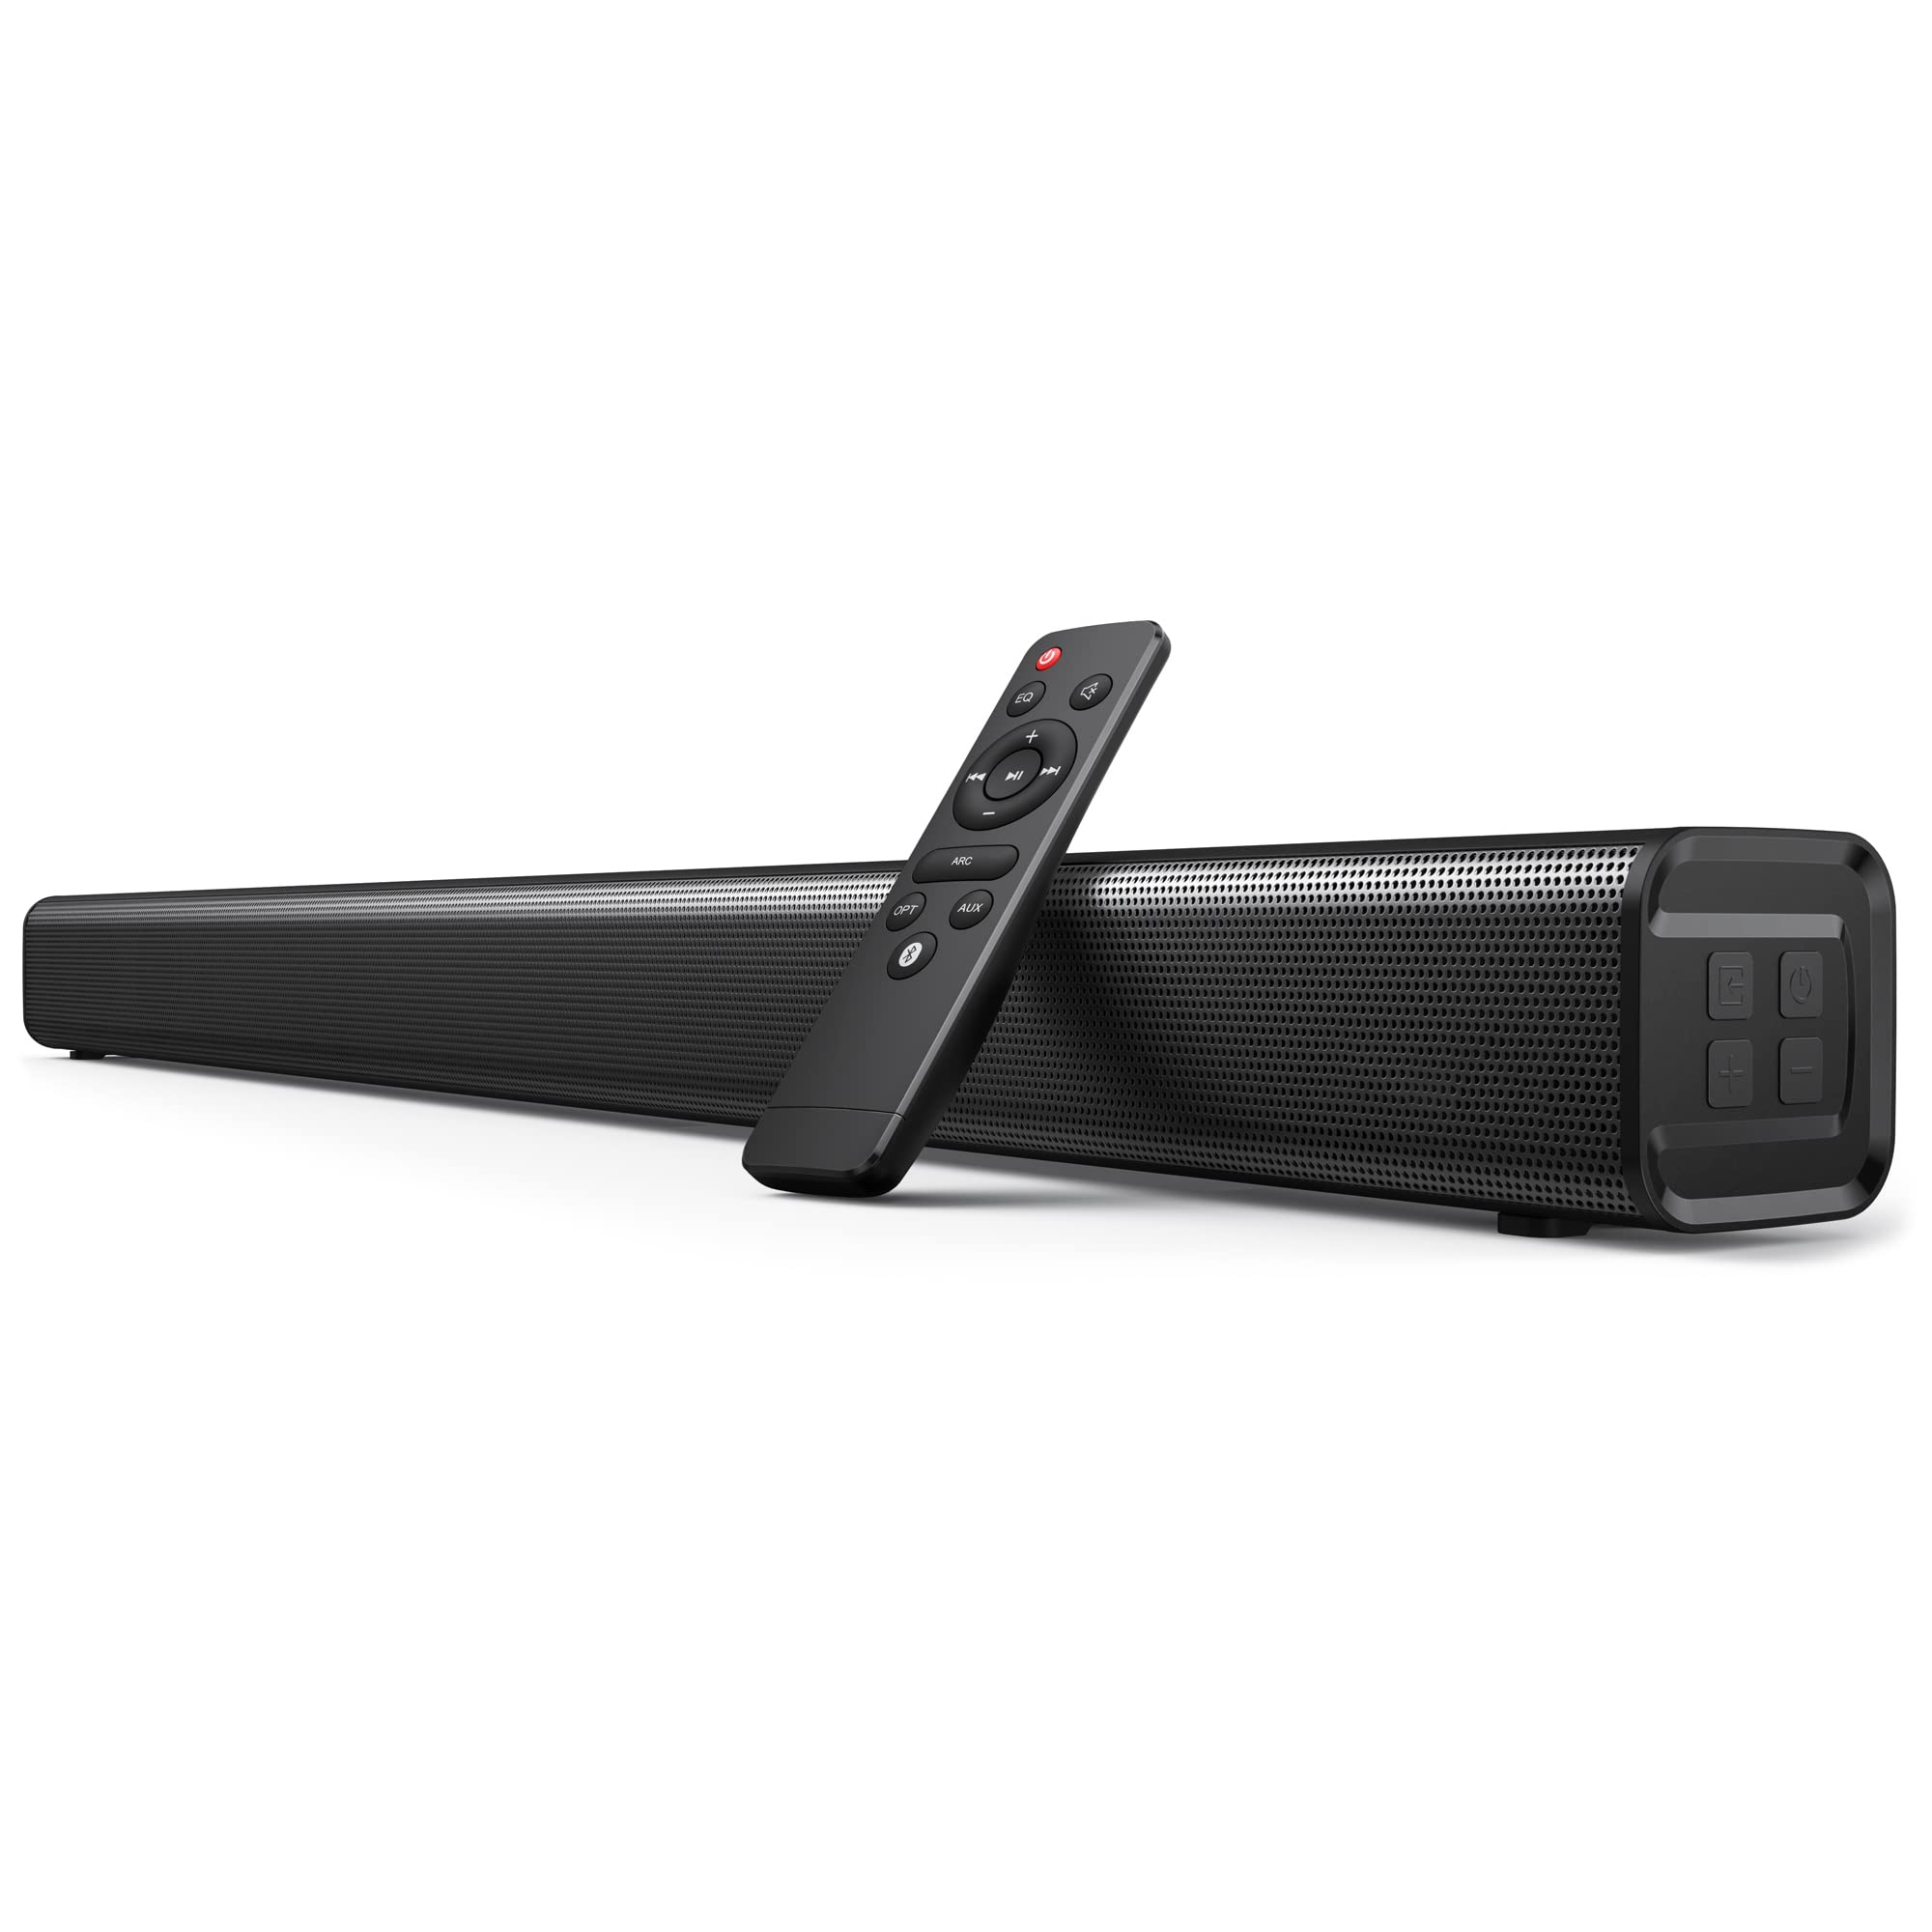 Can You Leave a Soundbar on All the Time?